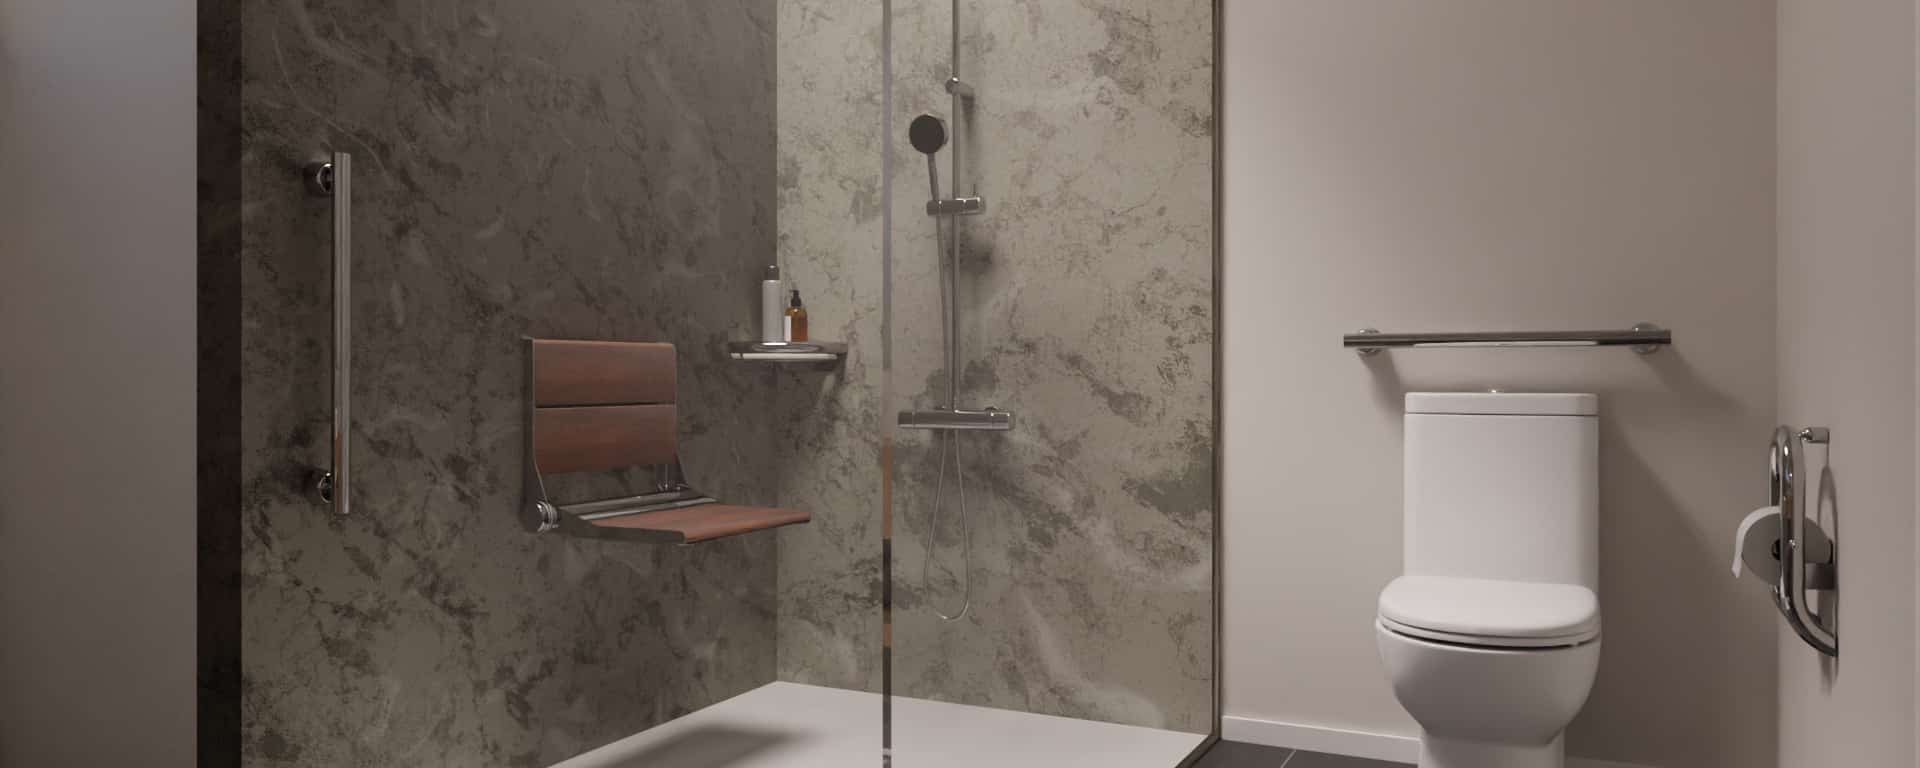 A bathroom with grab bars in the shower next to a wall-mounted seat and the toilet, and Invisia safety accessories next to the toilet and in the corner of the shower.